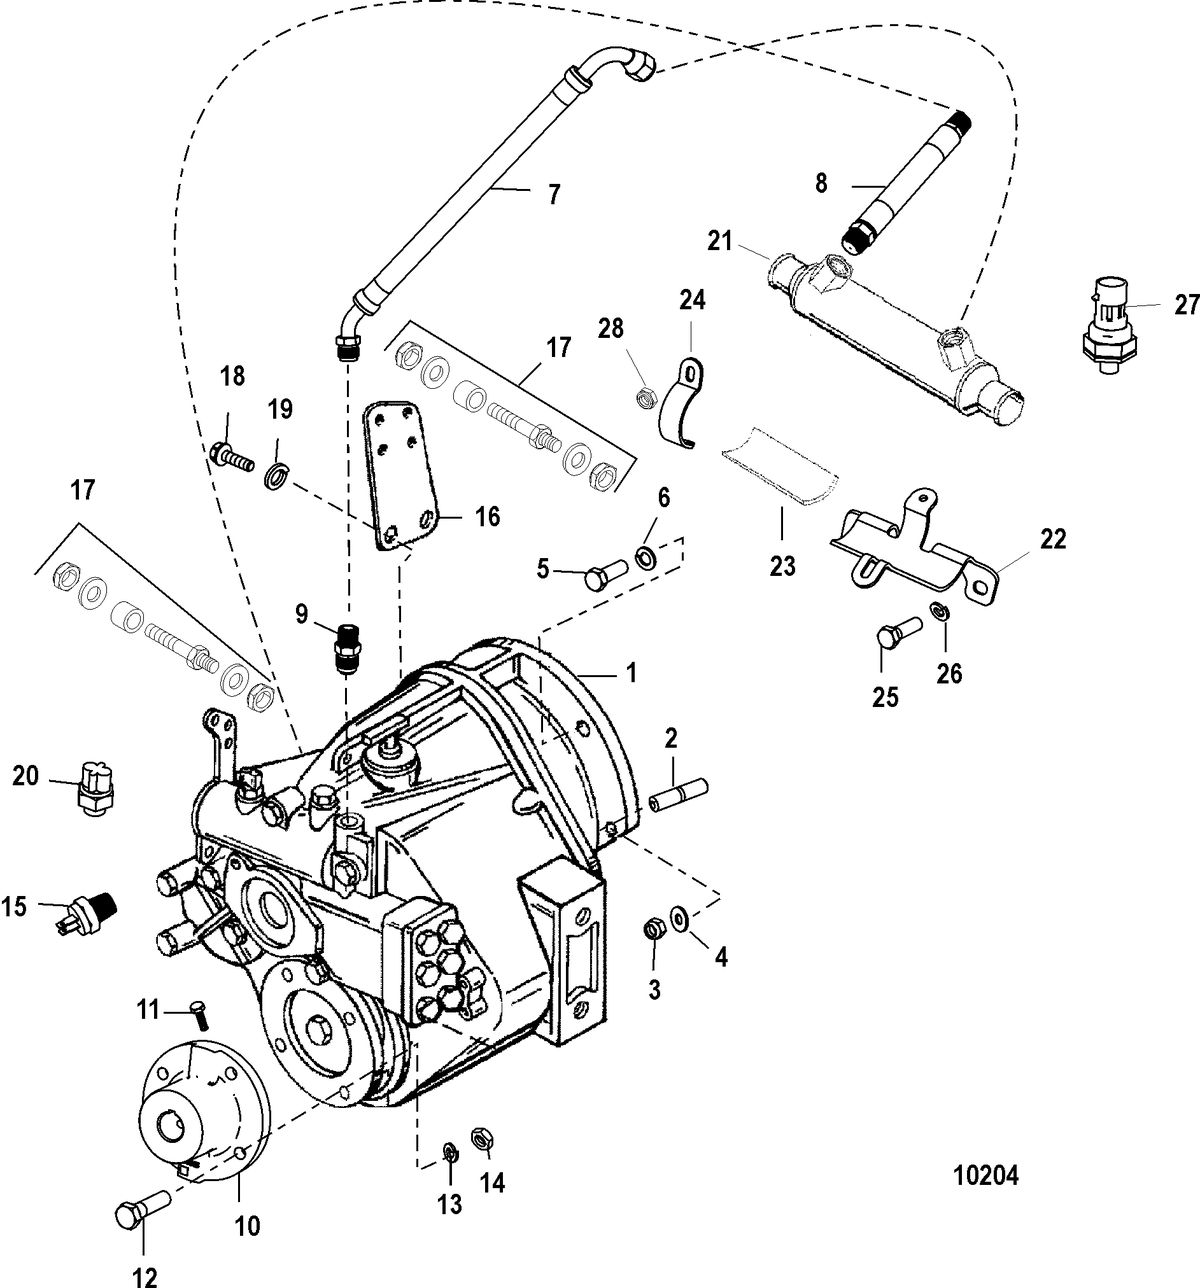 MERCRUISER 350 MAG MX 6.2L MPI INBOARD Transmission and Related Parts(BORG-WARNER 5000)